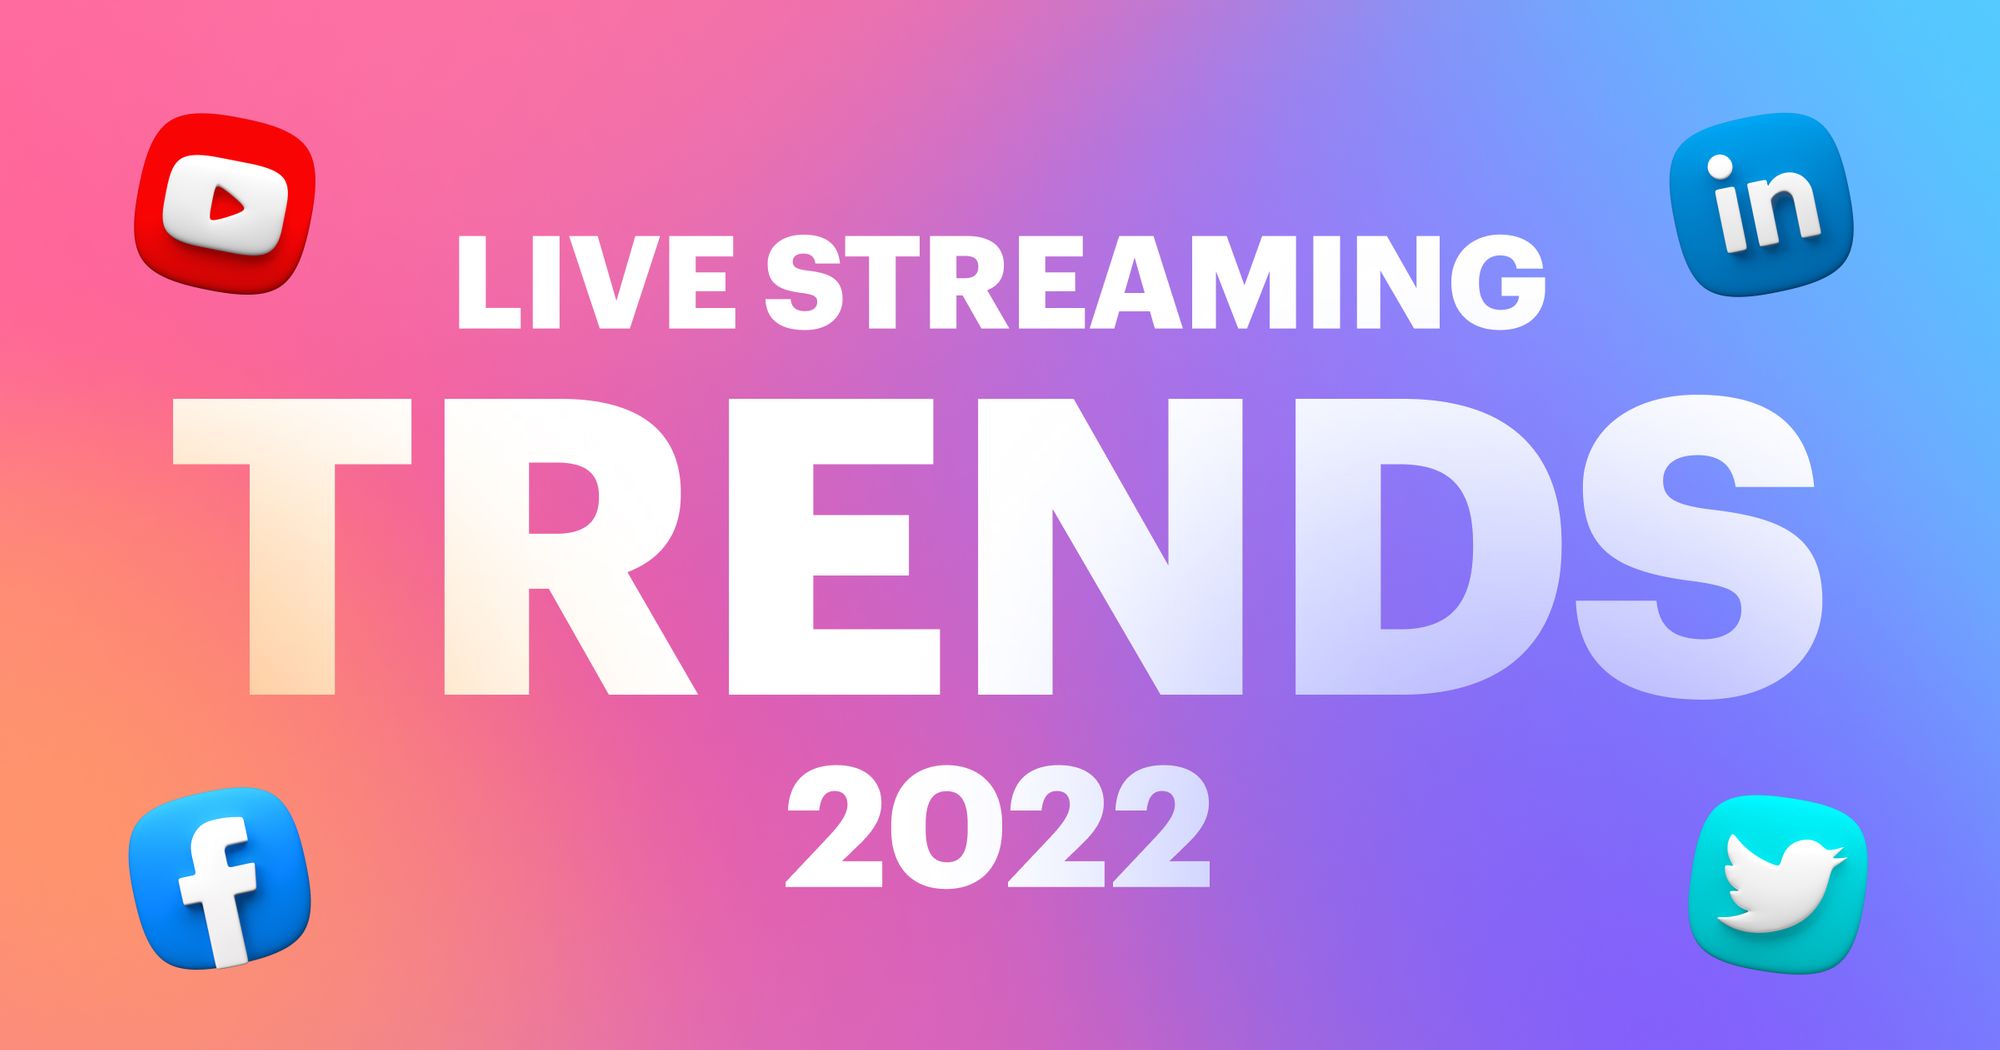 2022 live streaming trends you need to pay attention to